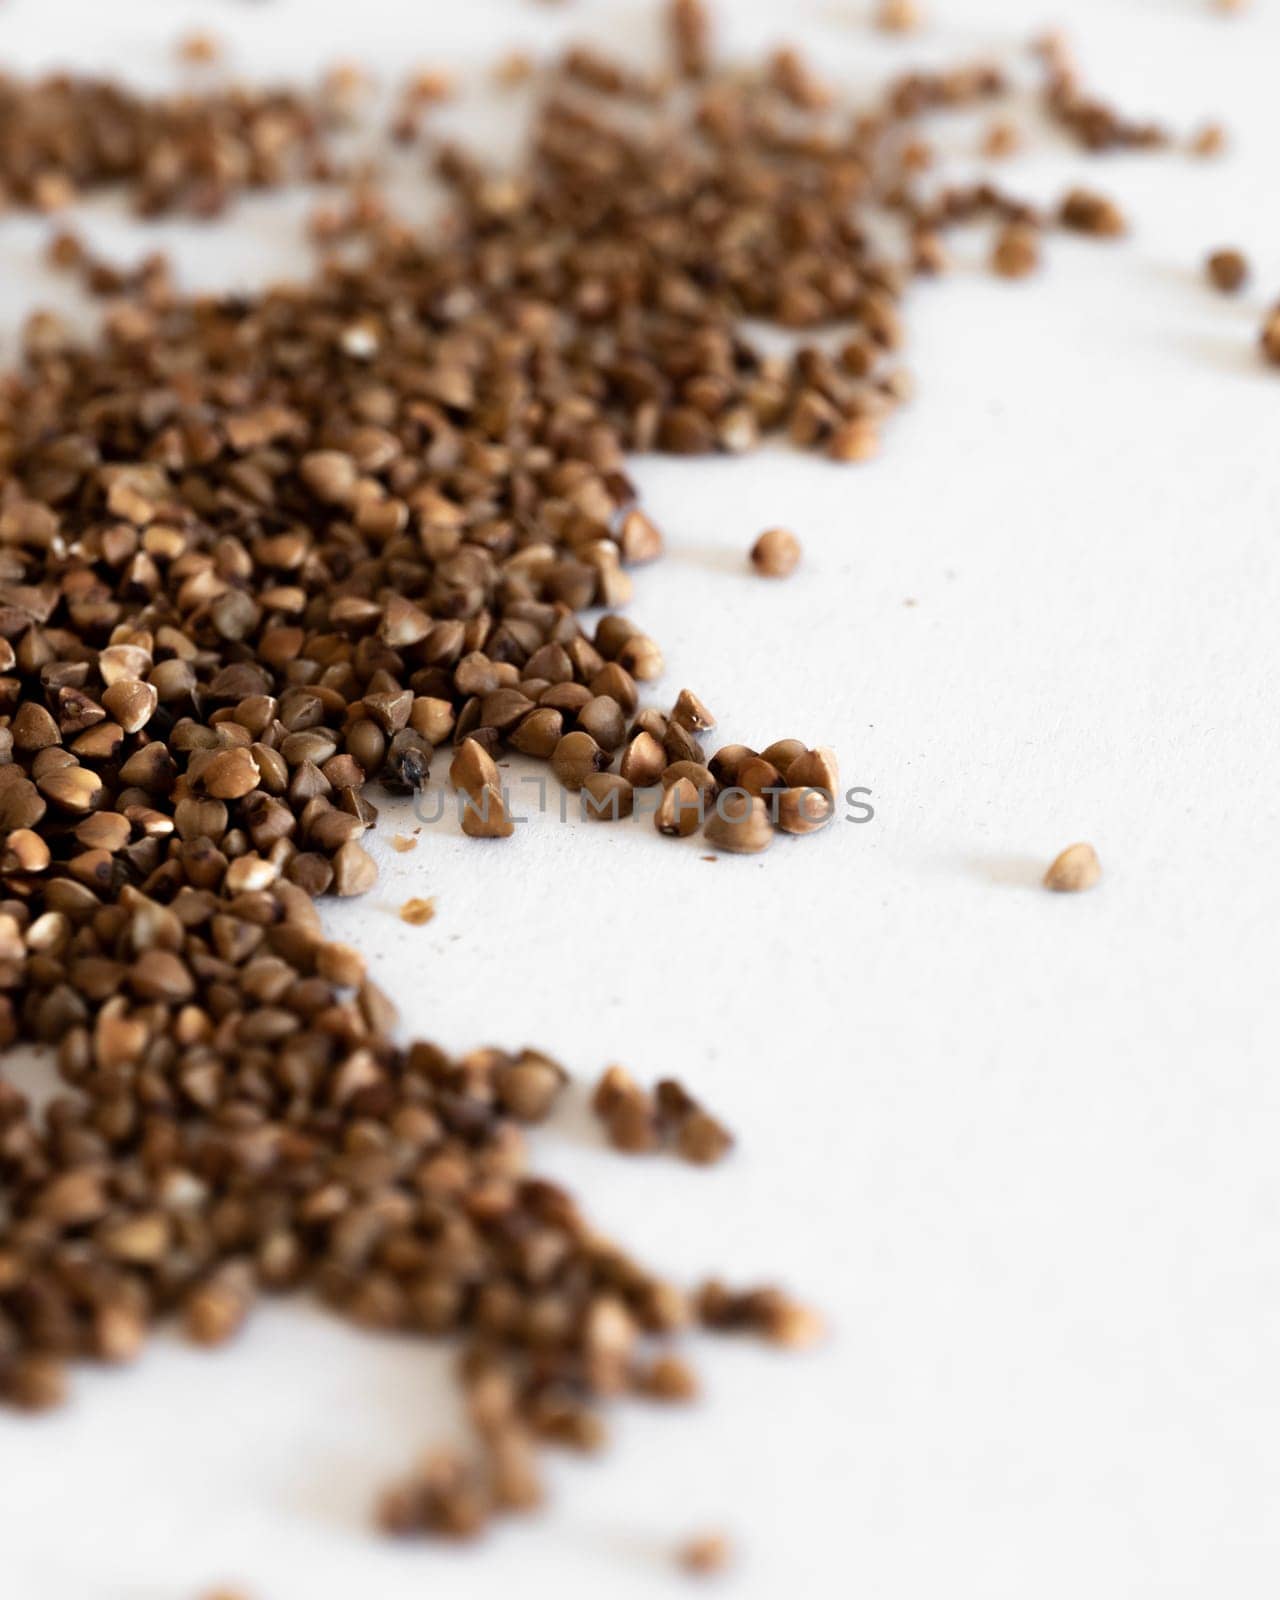 A Pile Of Brown Grains of buckwheat On A White Surface.